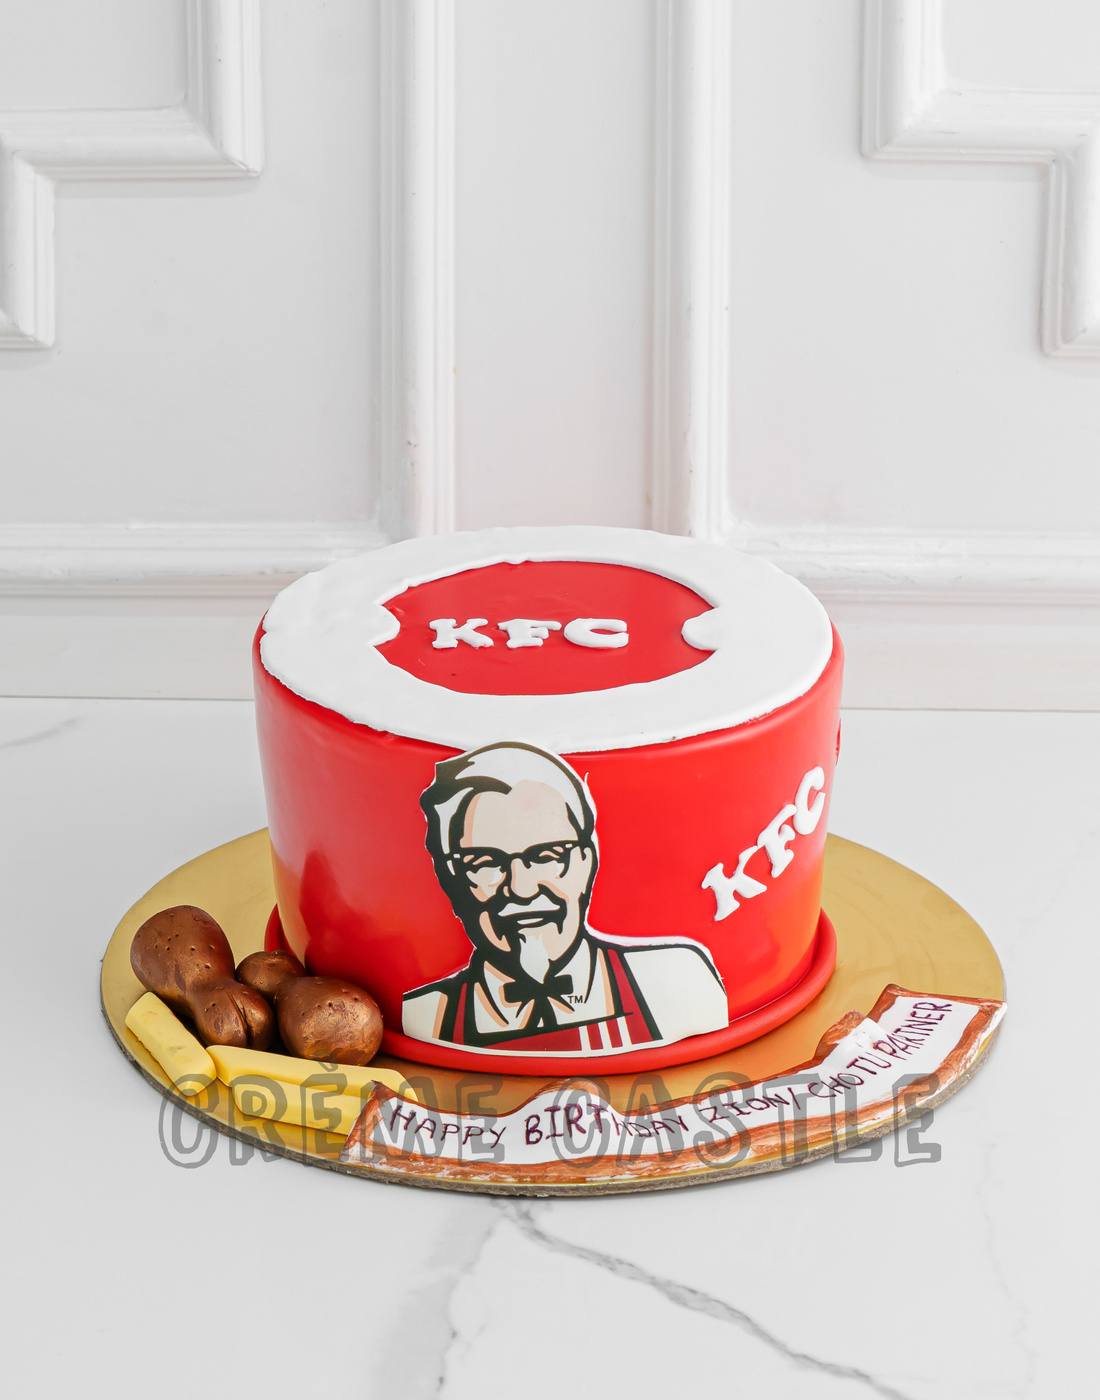 KFC Chicken Cakes Are a Bucket of Pure Awesome